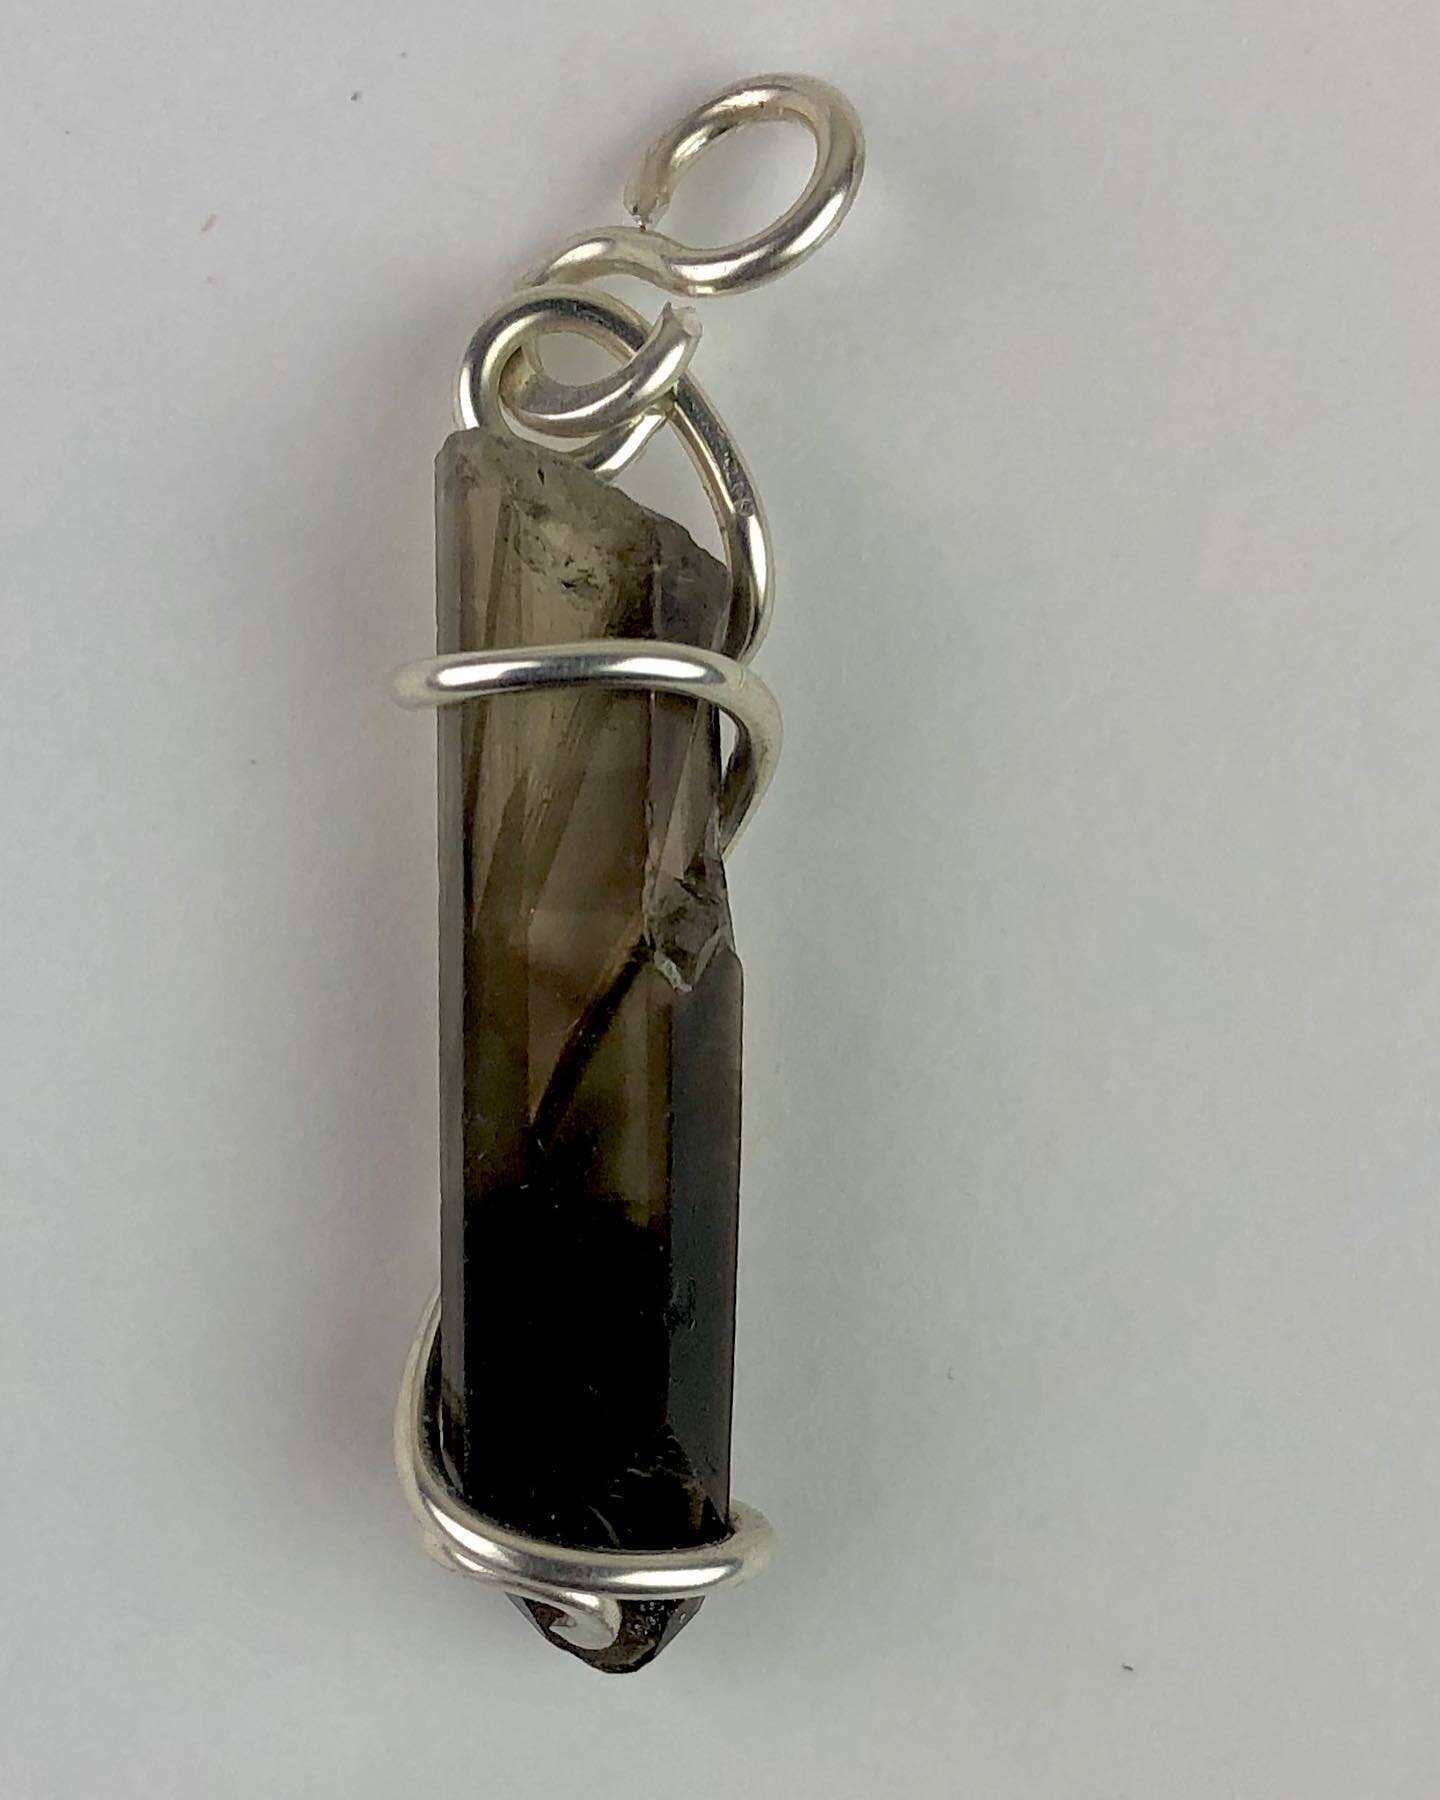 Smokey Quartz with Silver chain $42 at Discovery Green, Saturday night. @discoverygreen